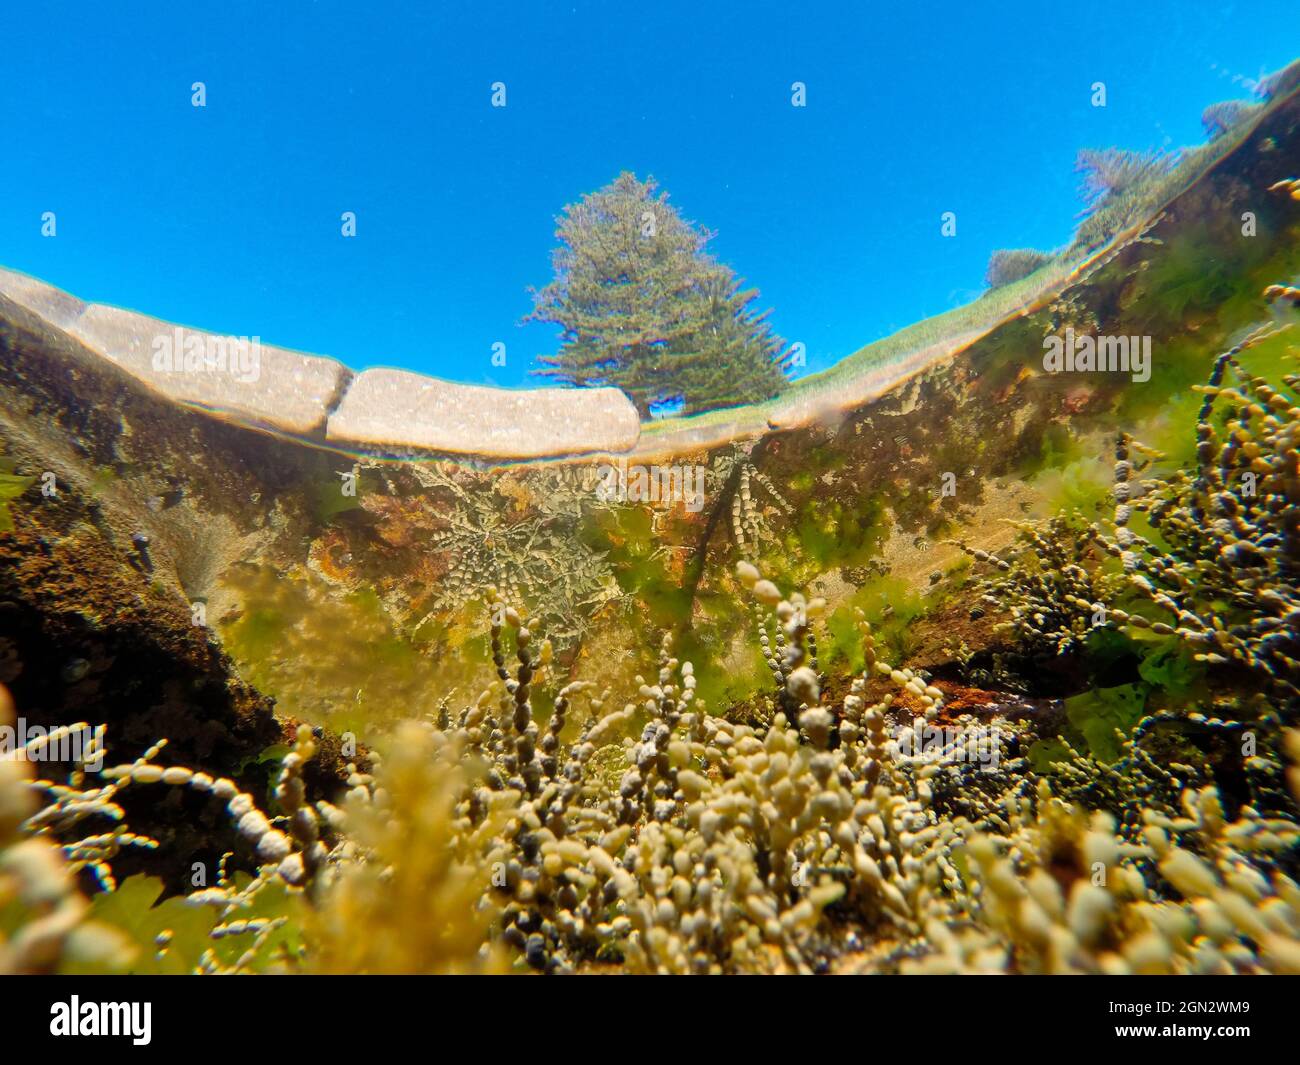 Rock pool, viewed from below with Neptune’s necklace (Hormosira banksii), The pool also contains Sea lettuce (Ulva australis), an edible green alga on Stock Photo